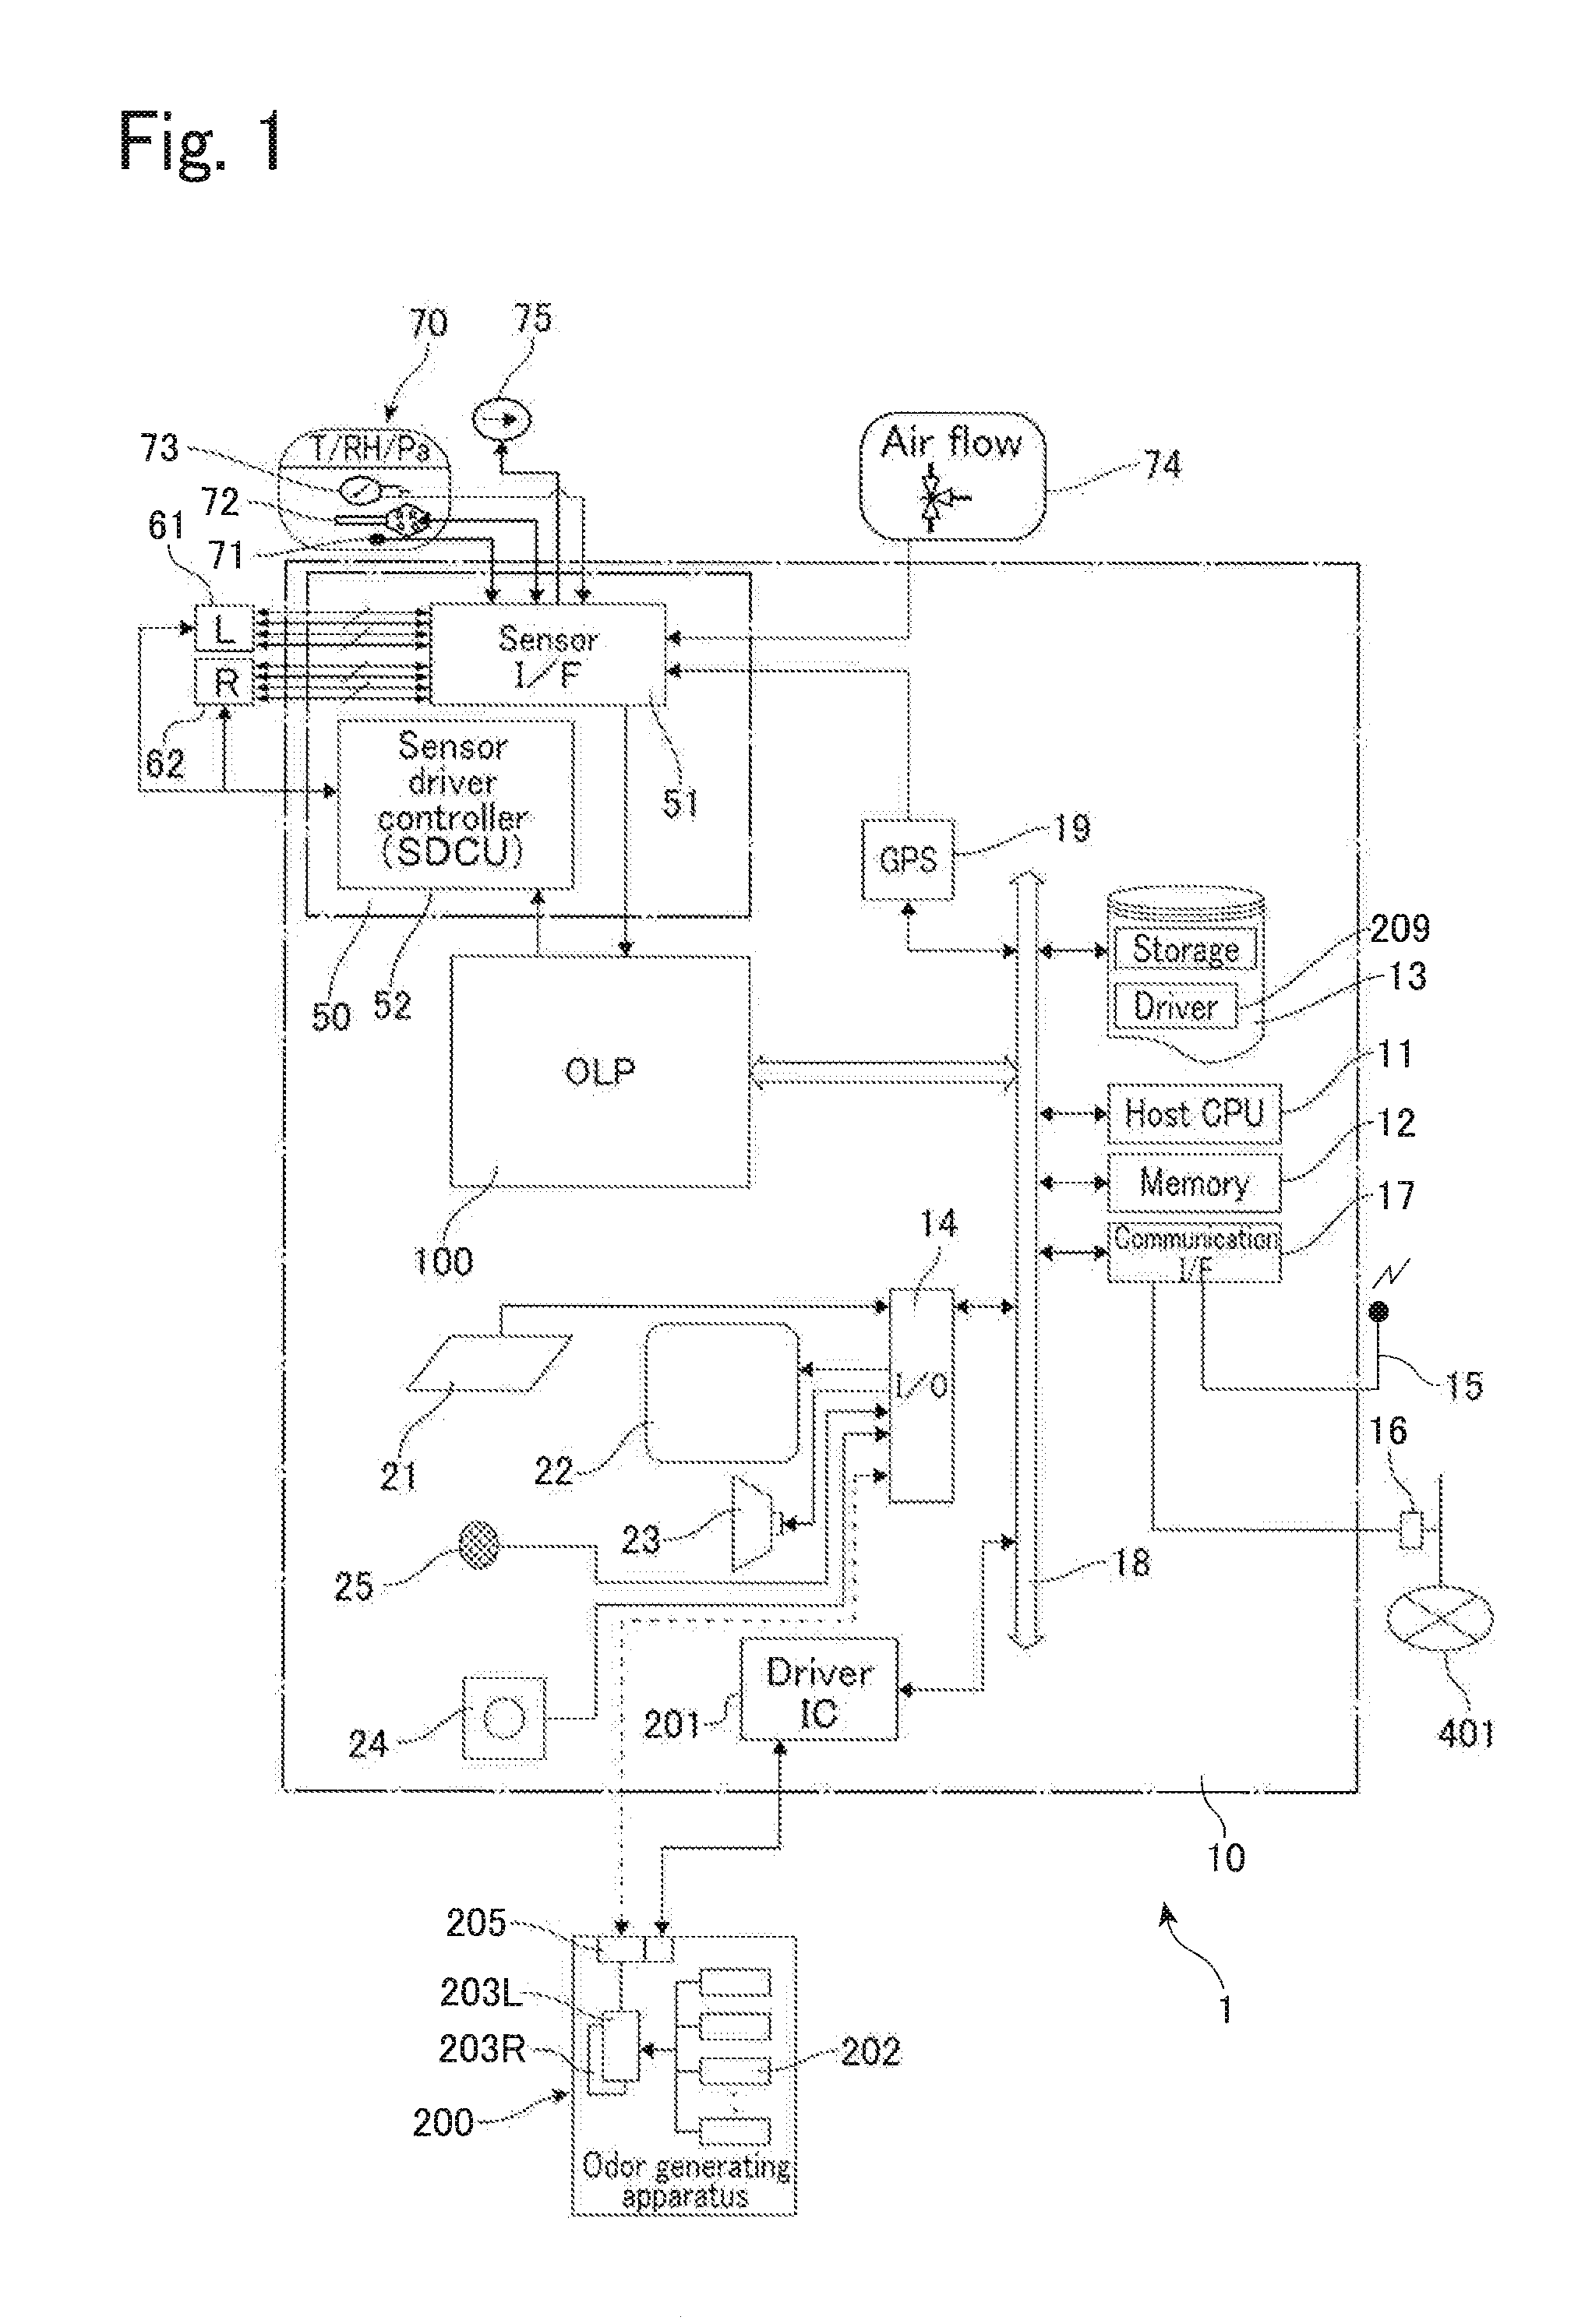 System for Handling Information Relating to Chemical Substances